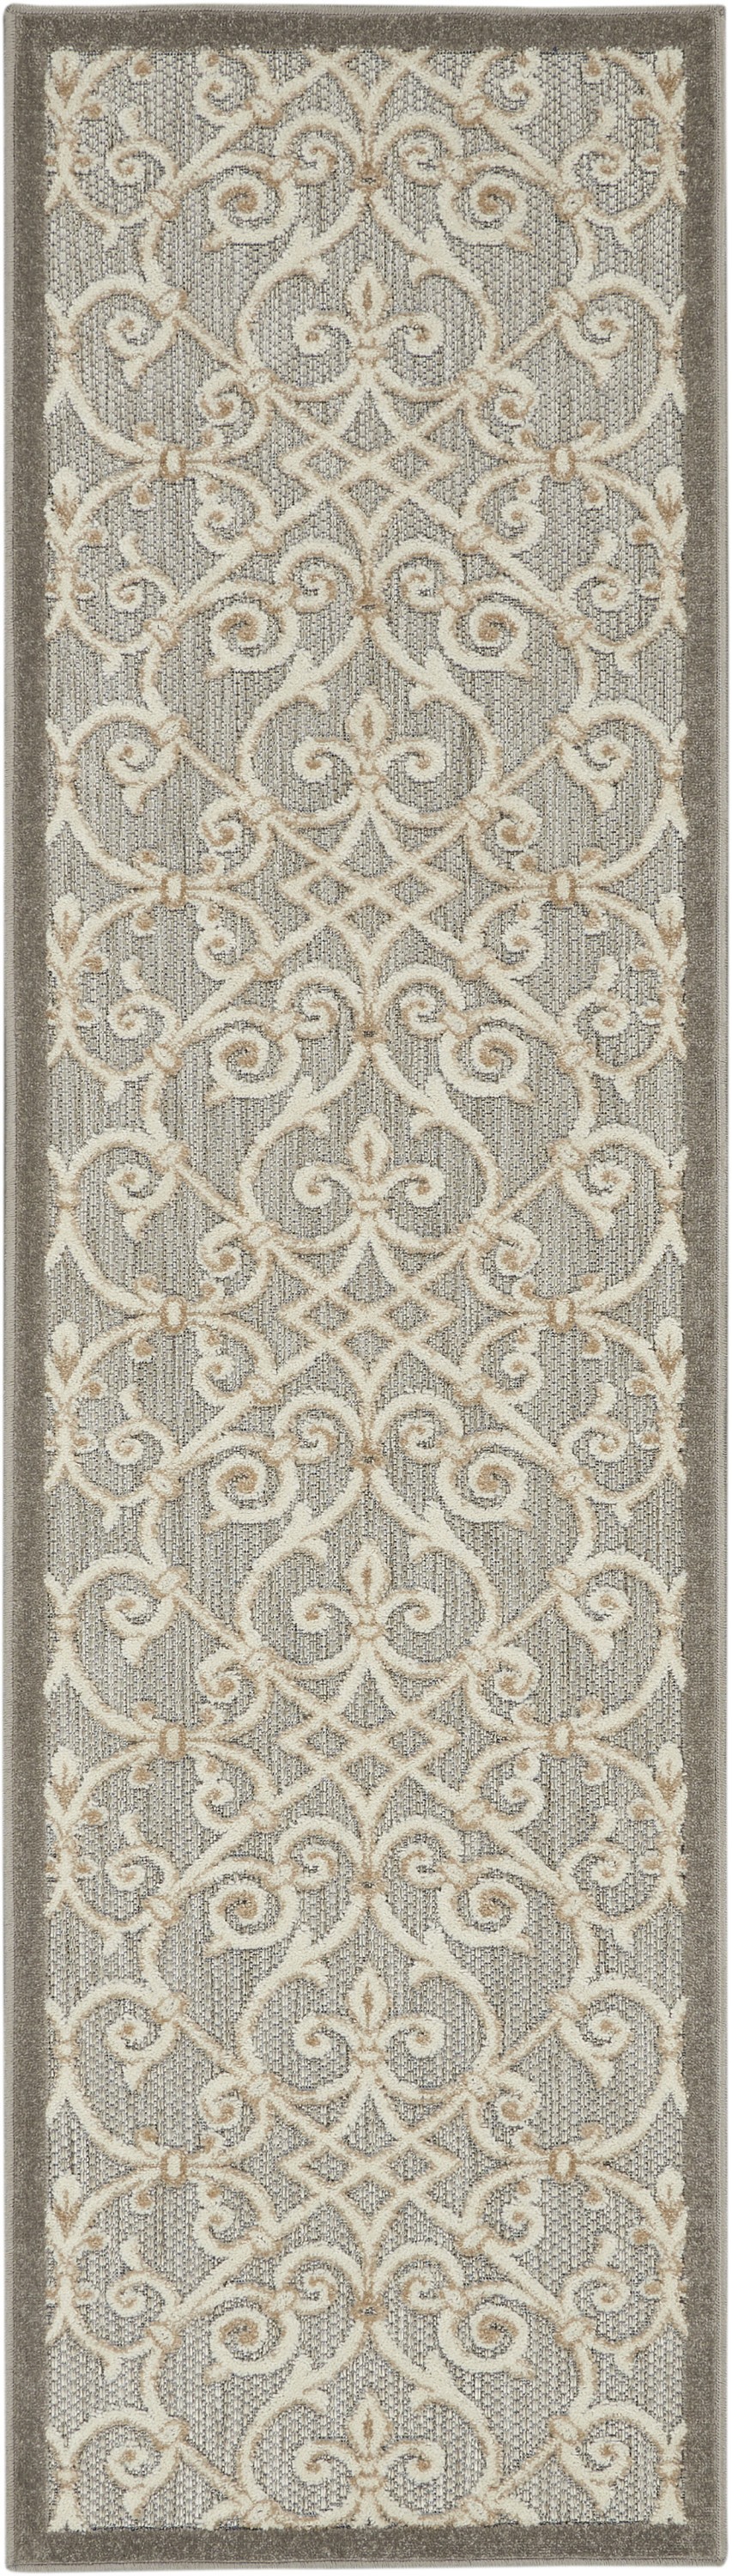 2' X 6' Gray And Ivory Floral Indoor Outdoor Area Rug-385041-1